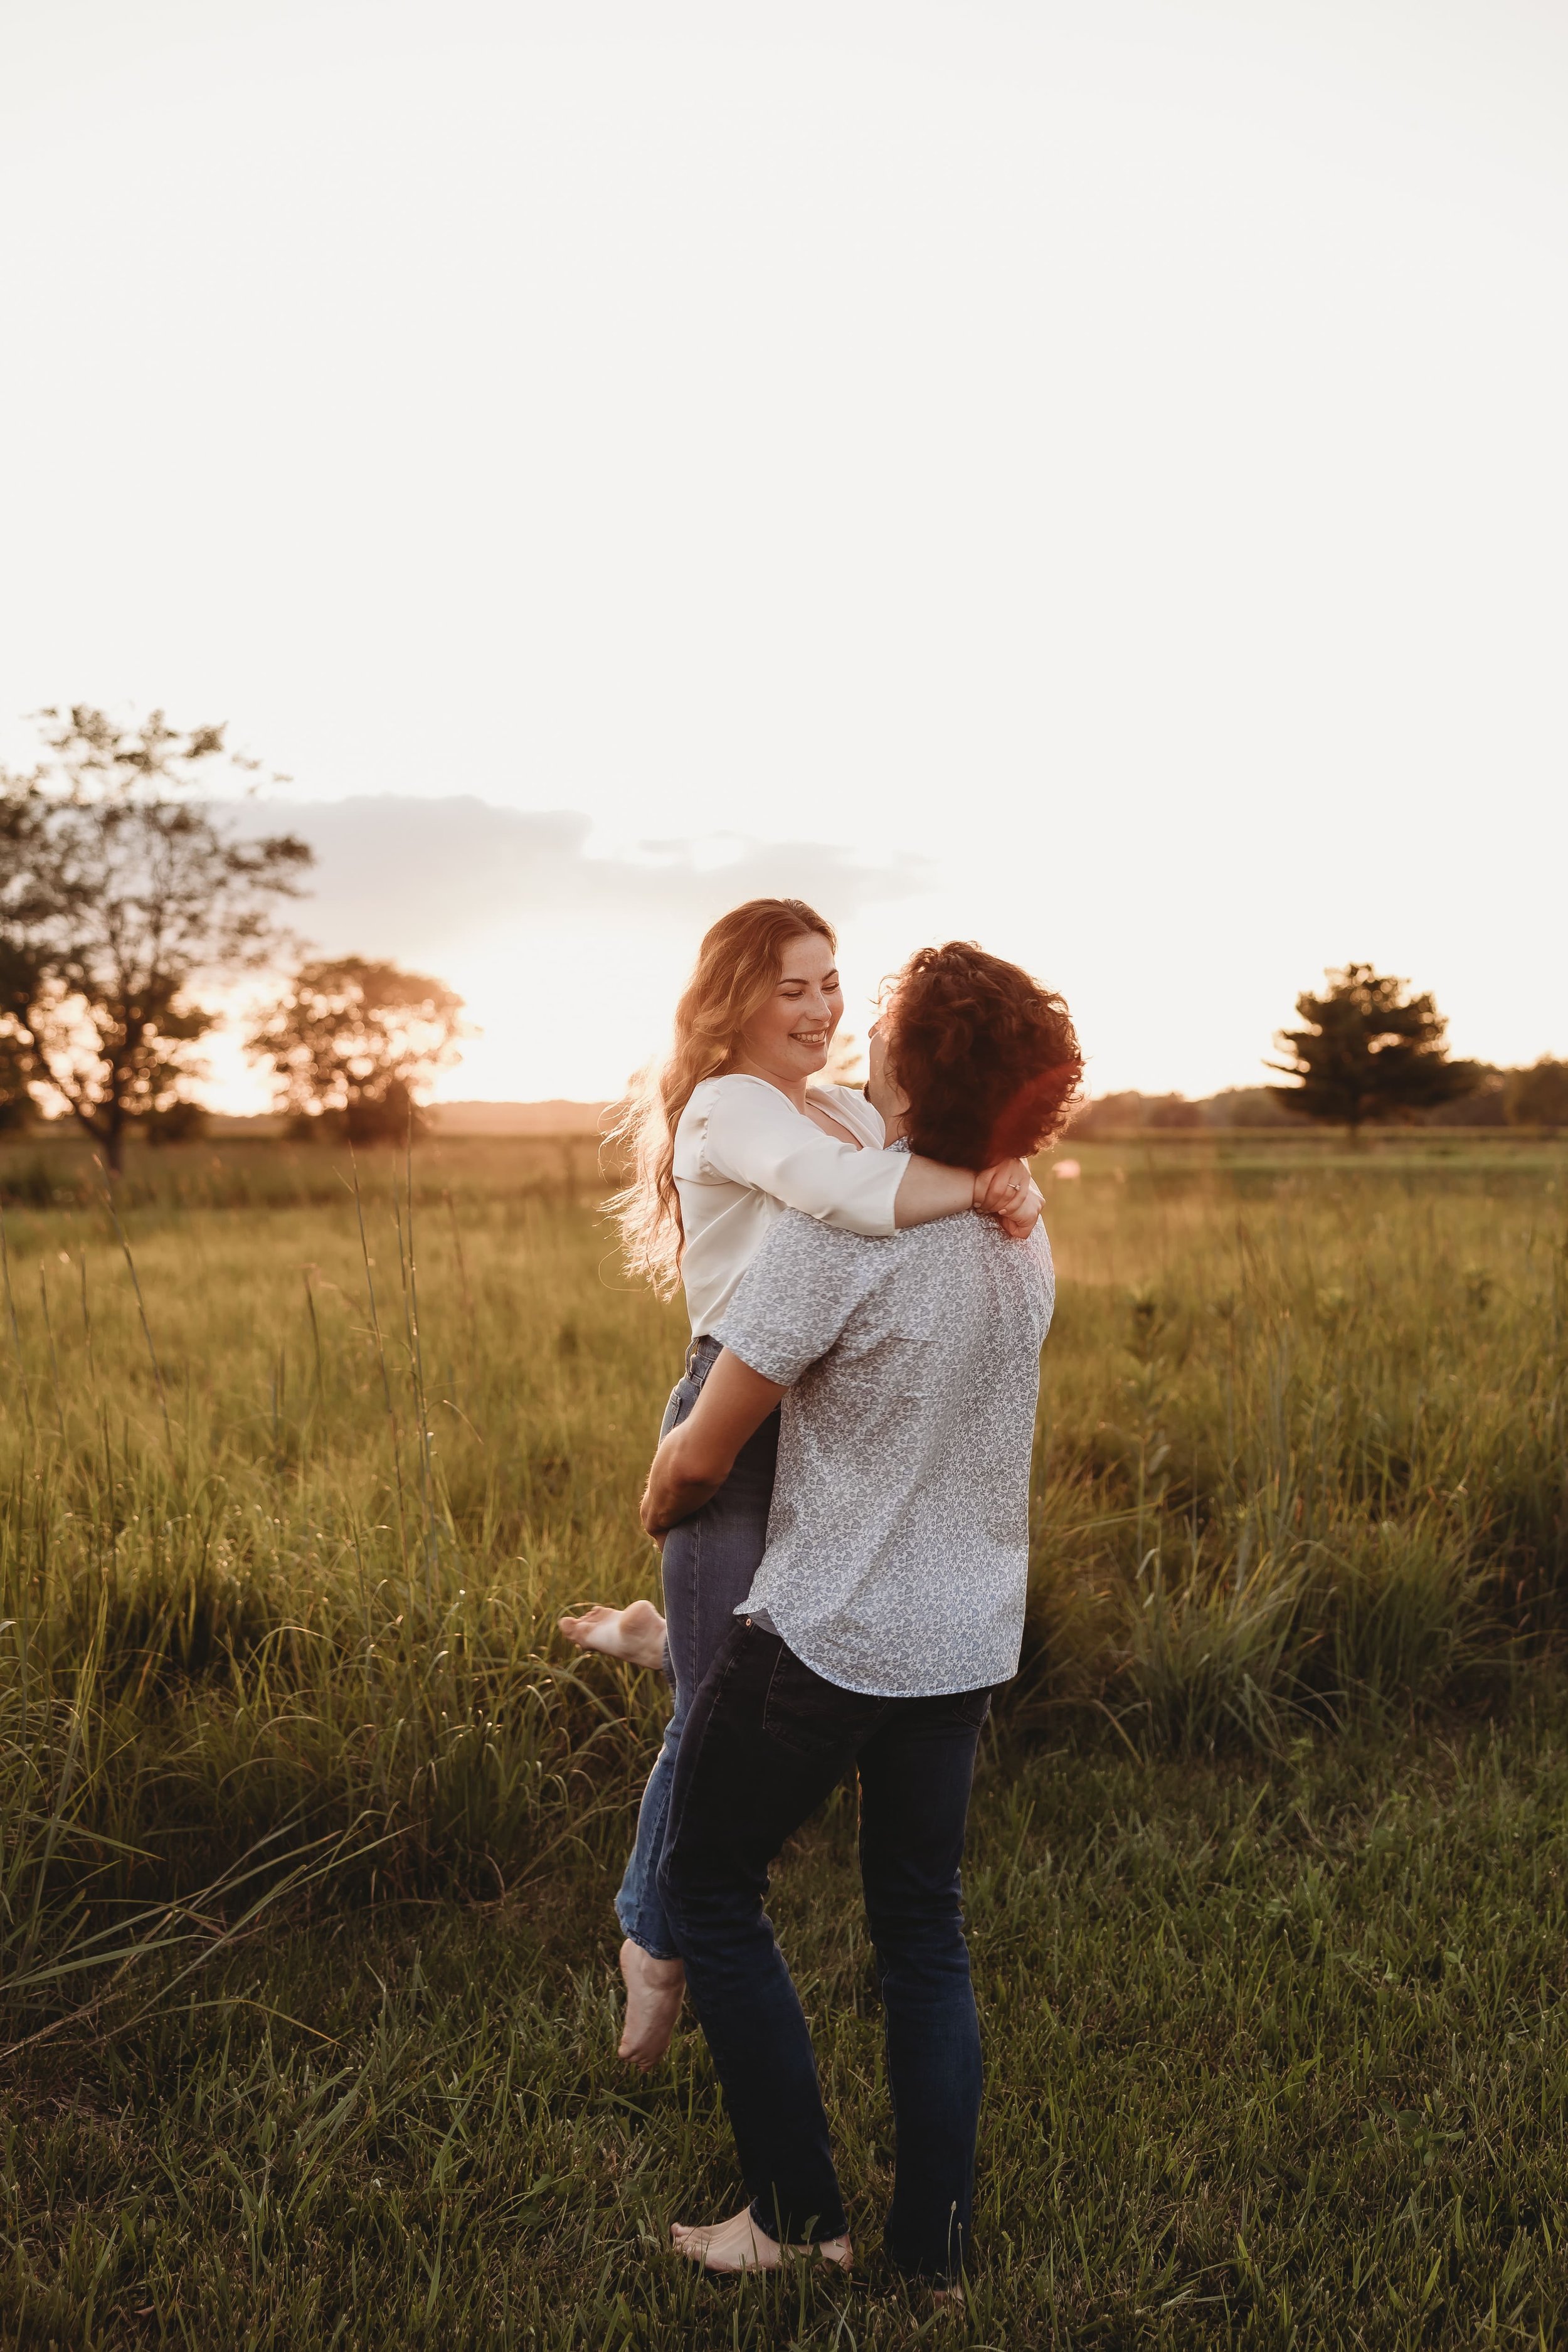  a man swings his fiancee around in a field as the sun sets behind them 